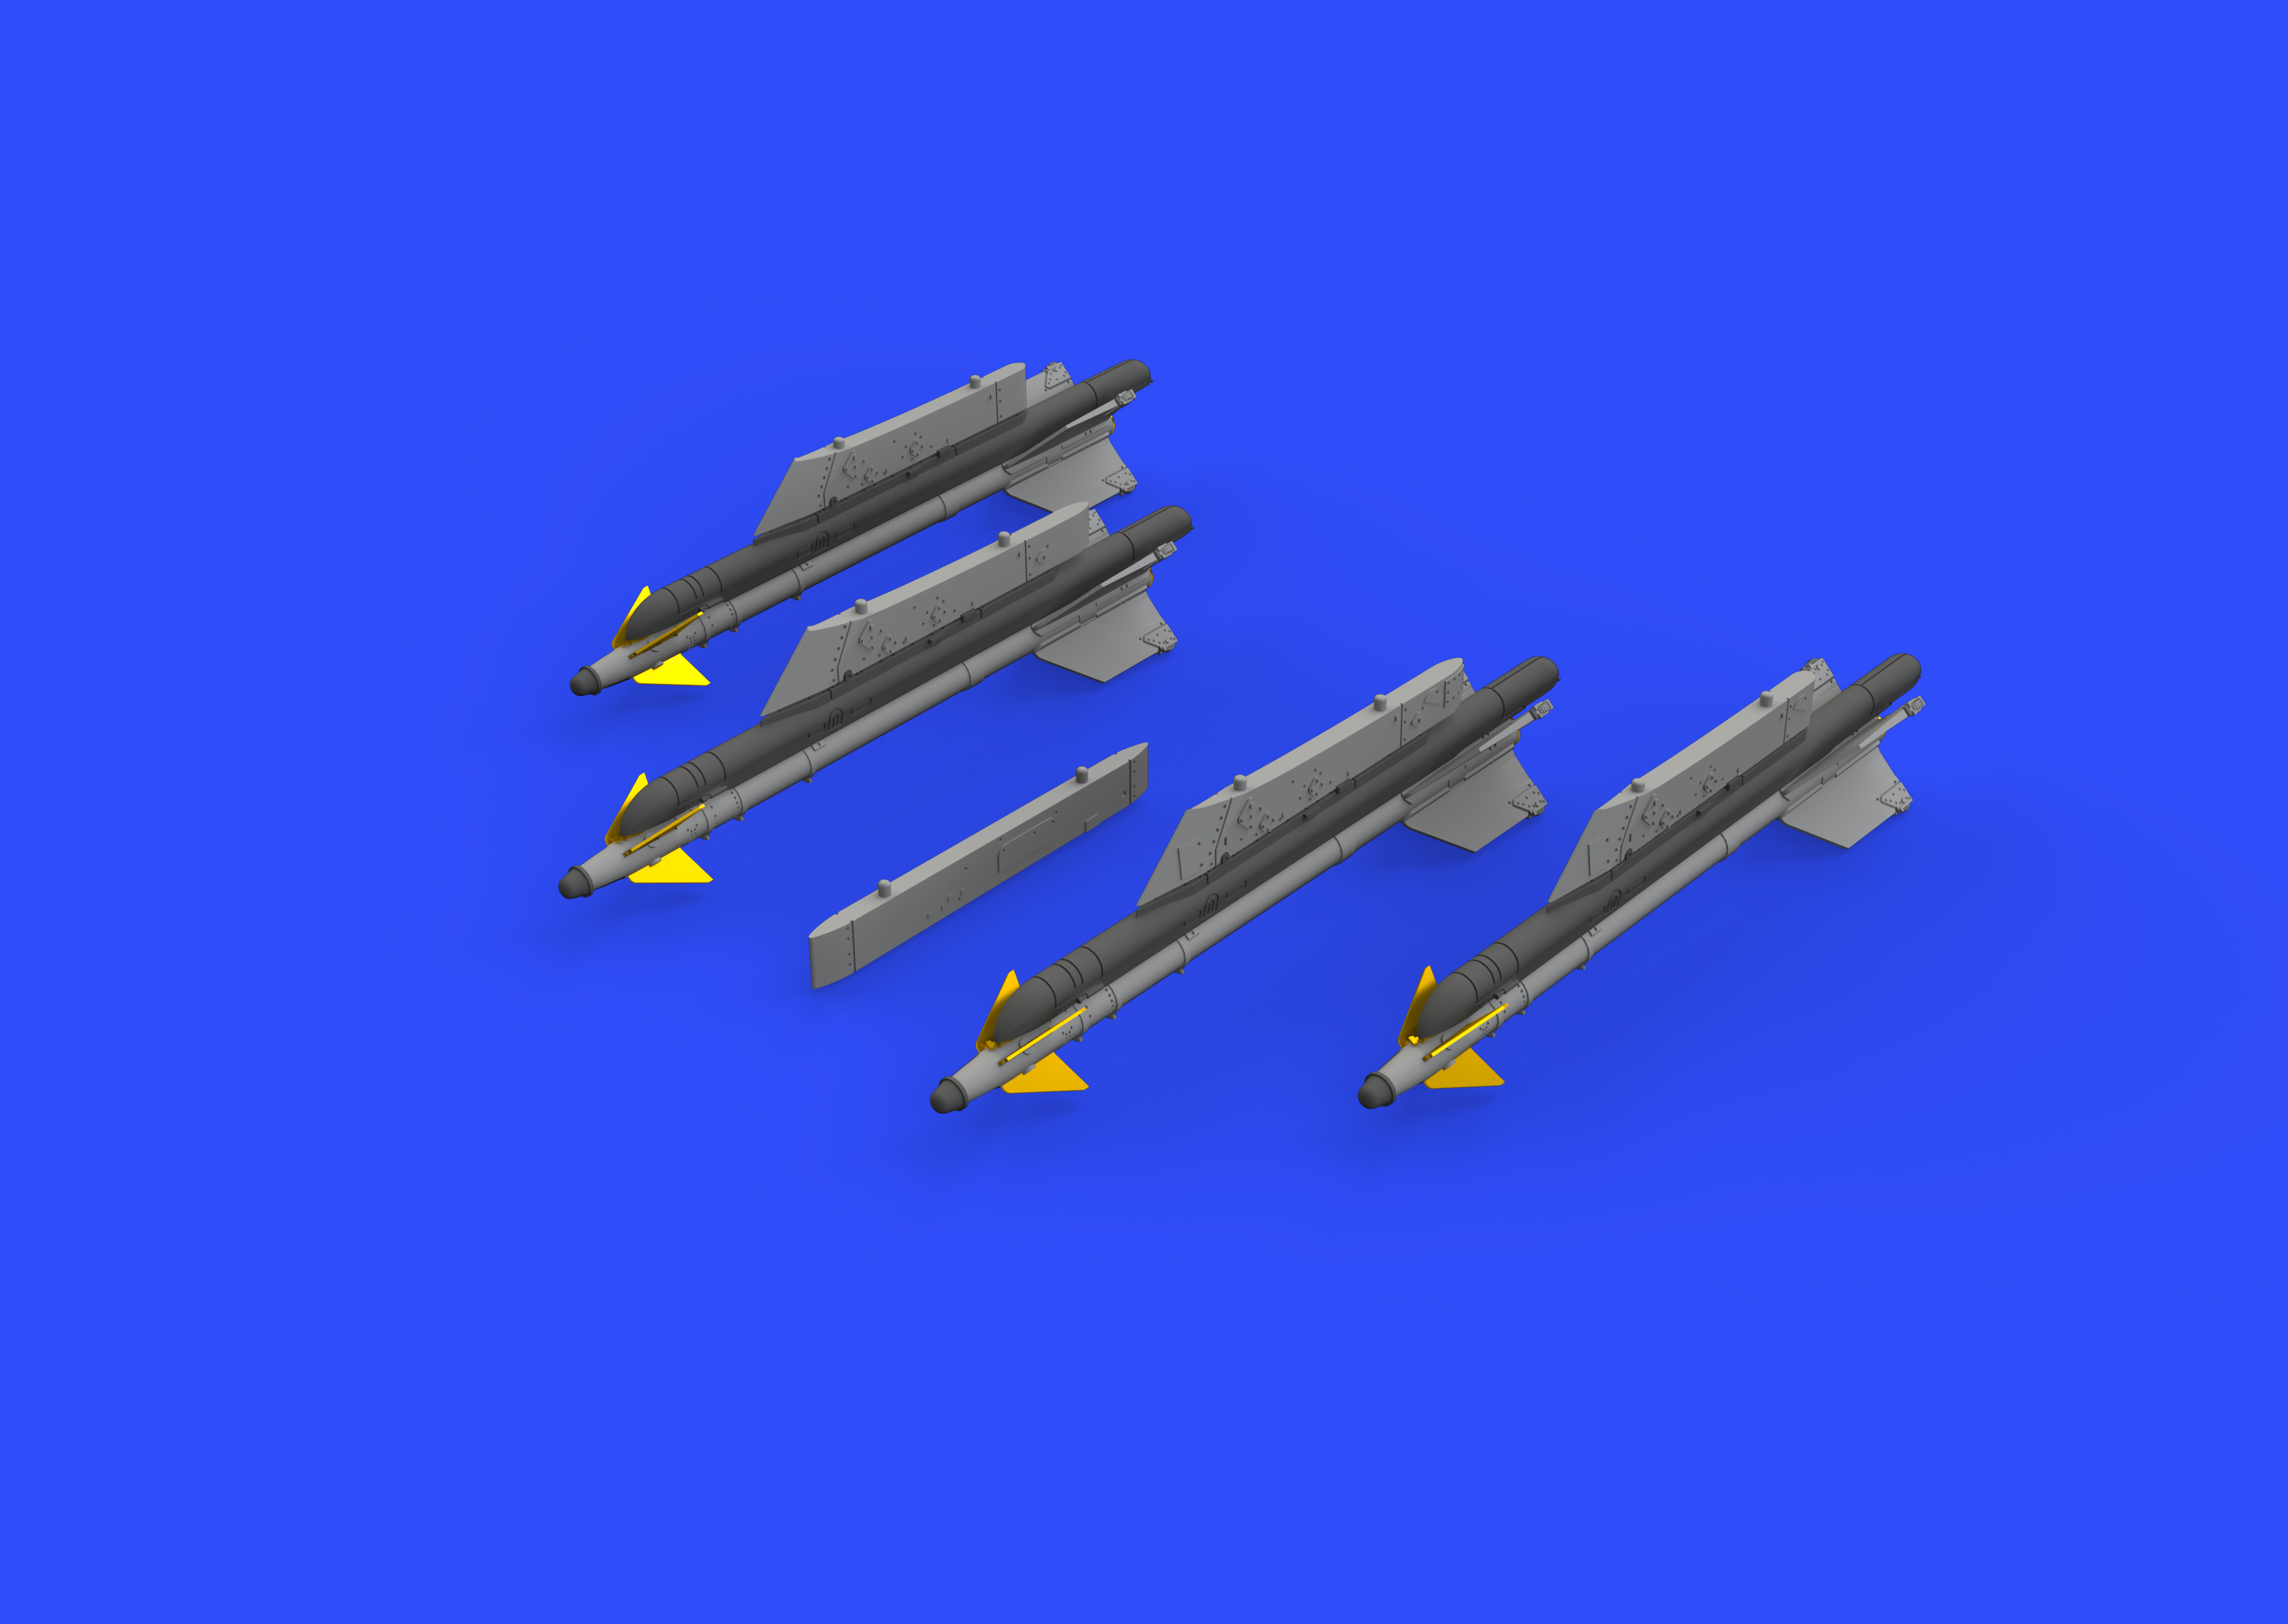 R-13M missiles w/ pylons for MiG-21 1/72 - Eduard Store